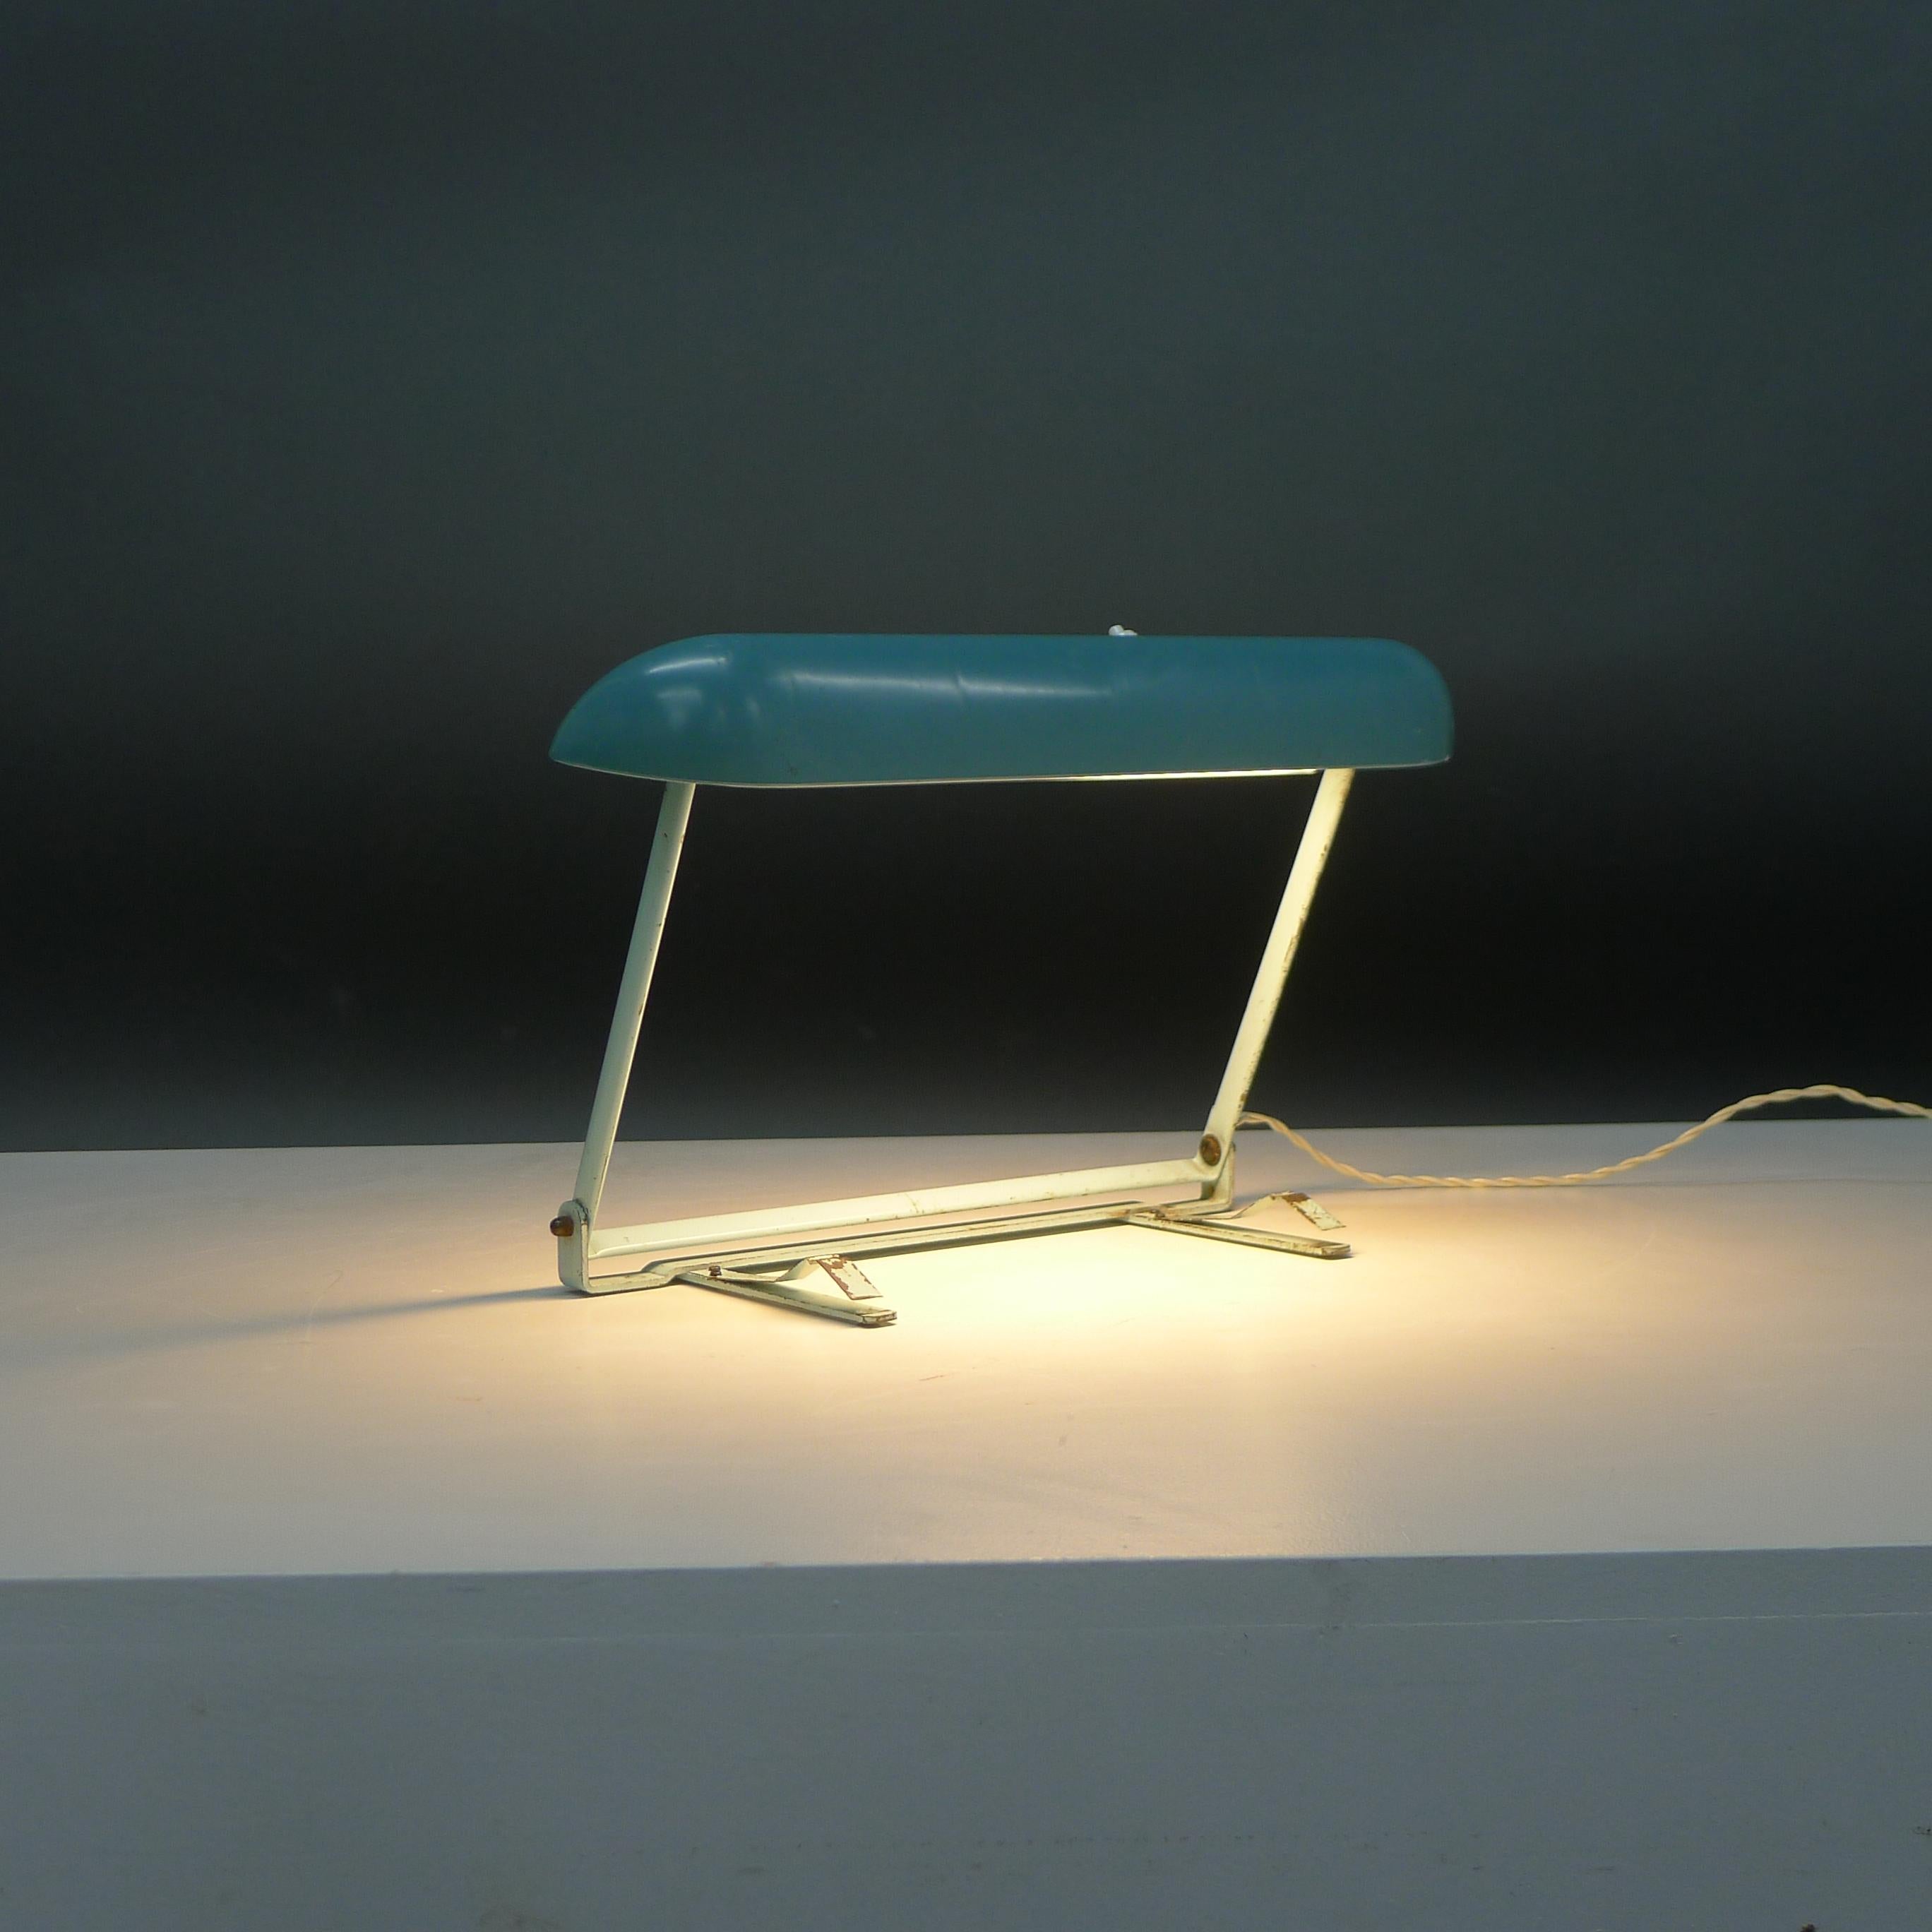 Mid-Century Modern Philips Bakelite Desk Lamp, design attributed to Charlotte Perriand, 1950s For Sale